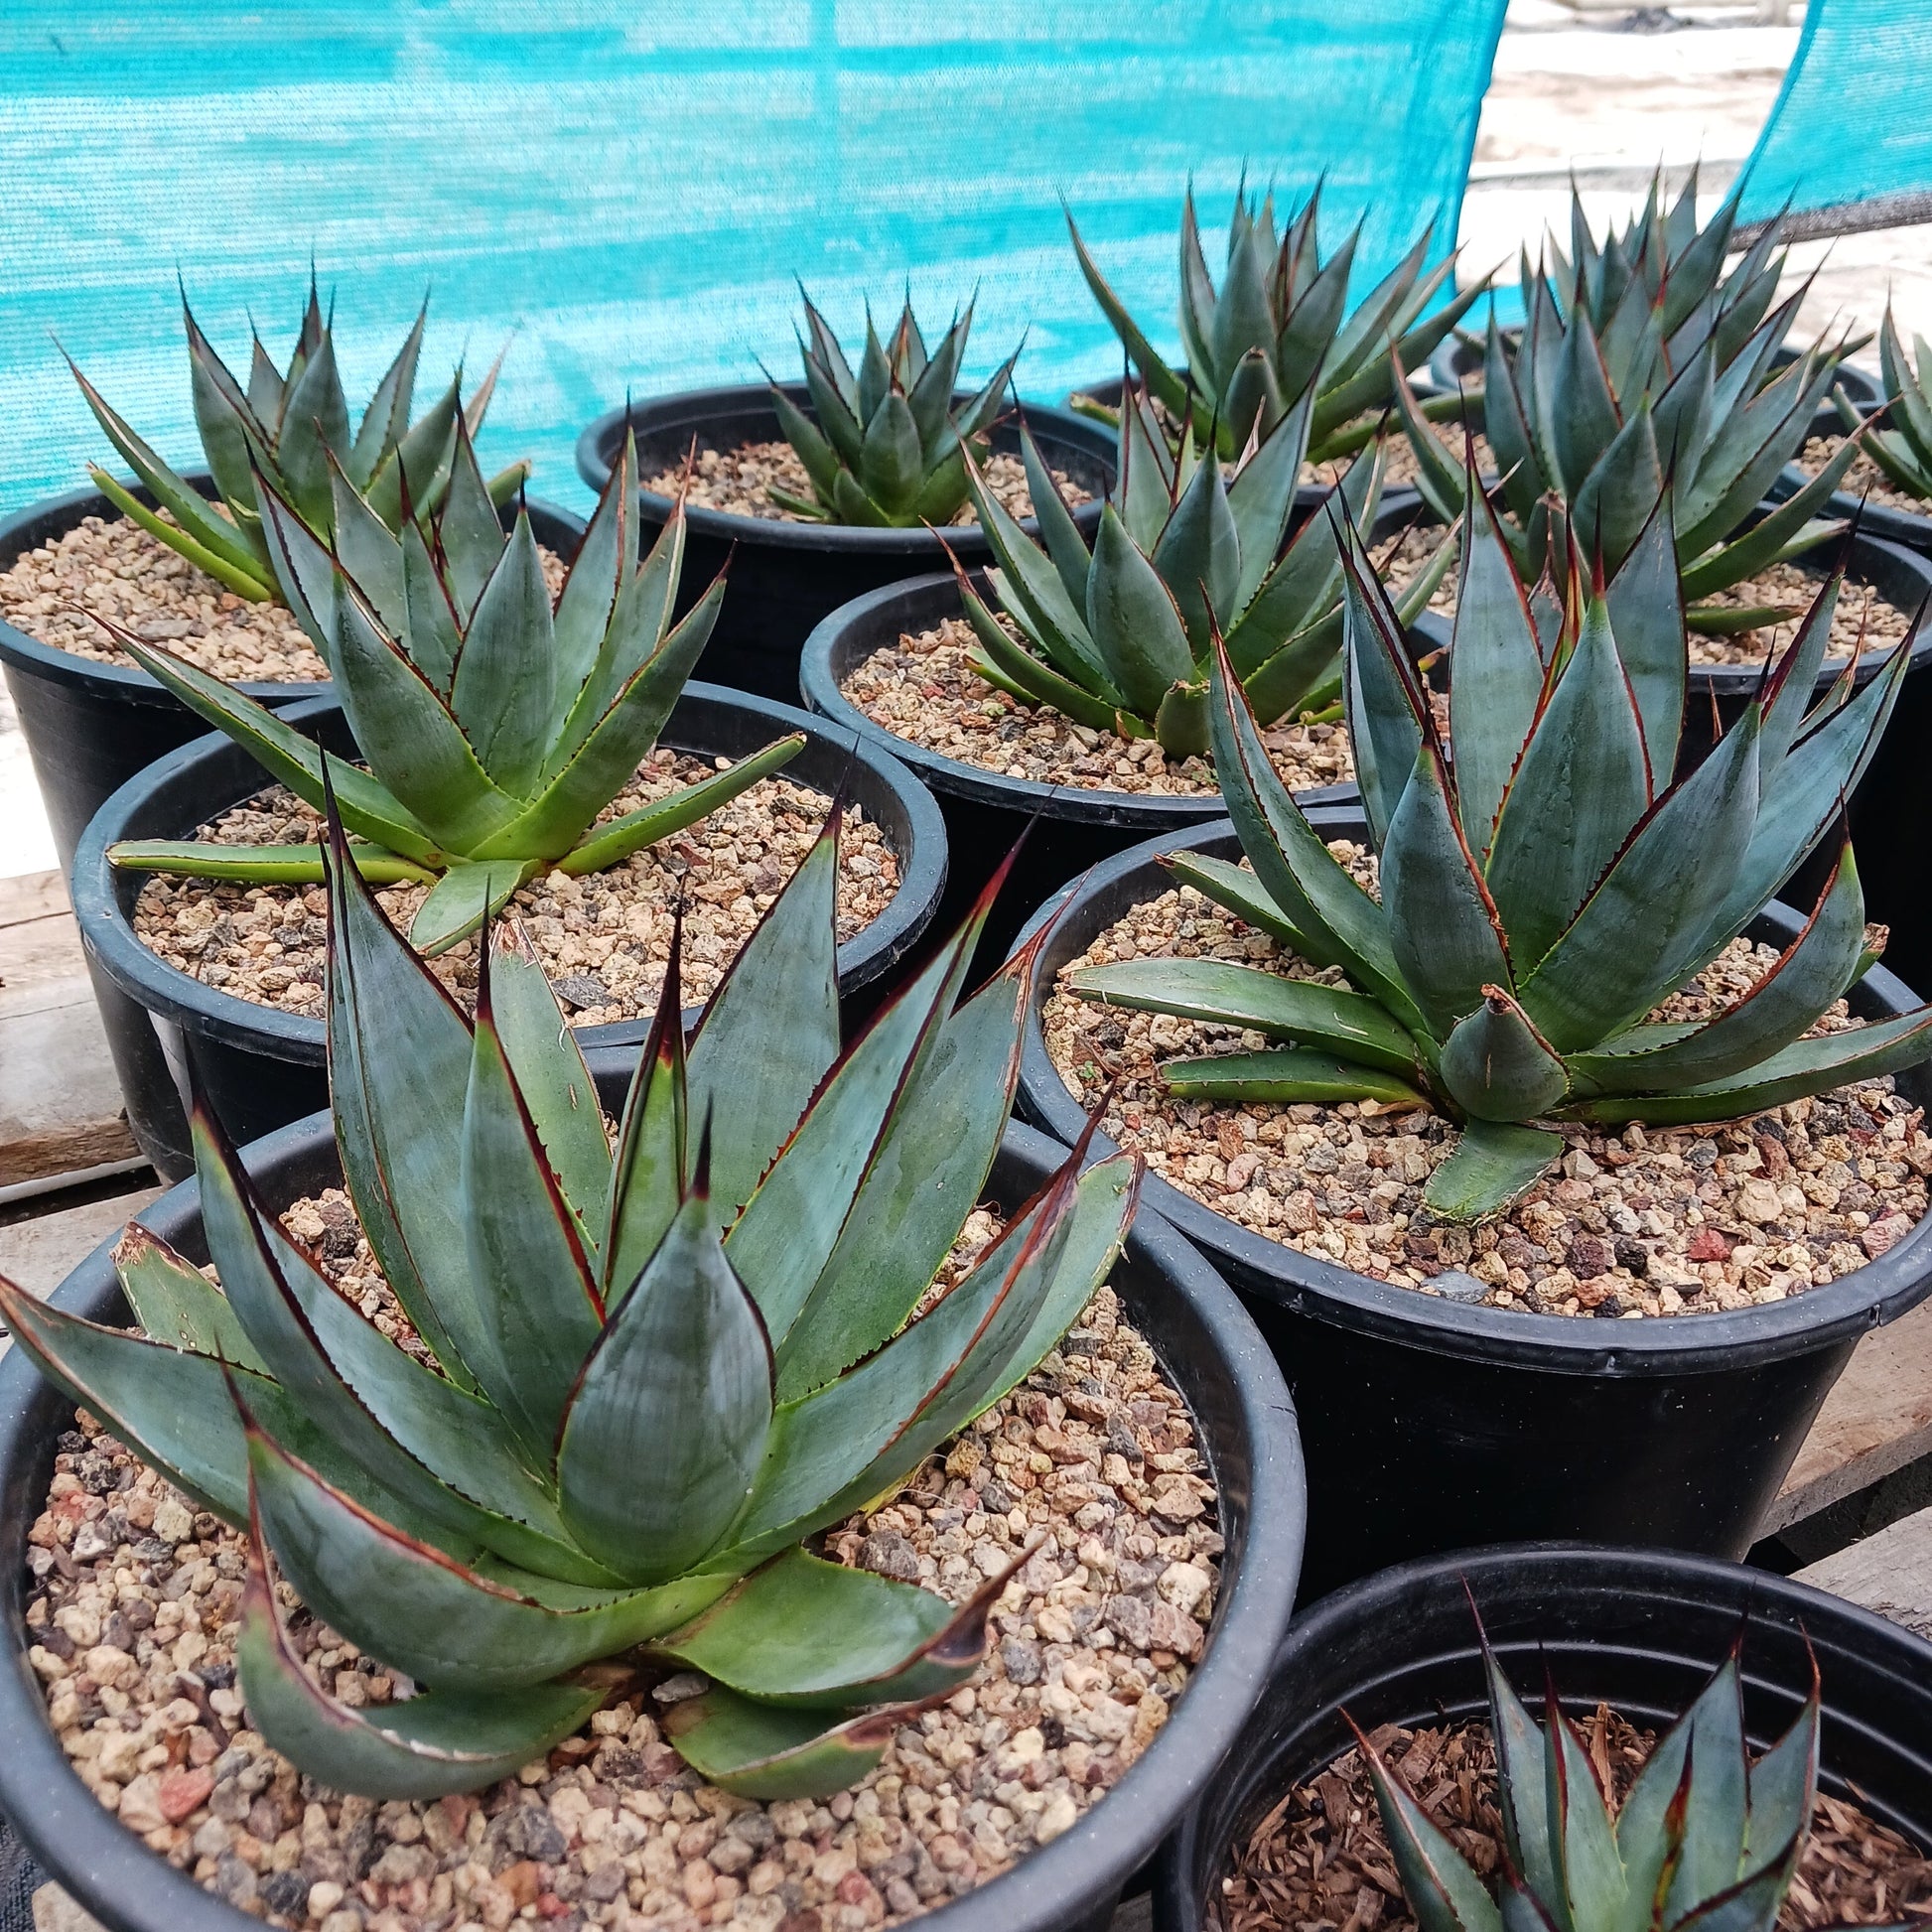 Agave several Agave "Blue Glow" in 5ga nursery container